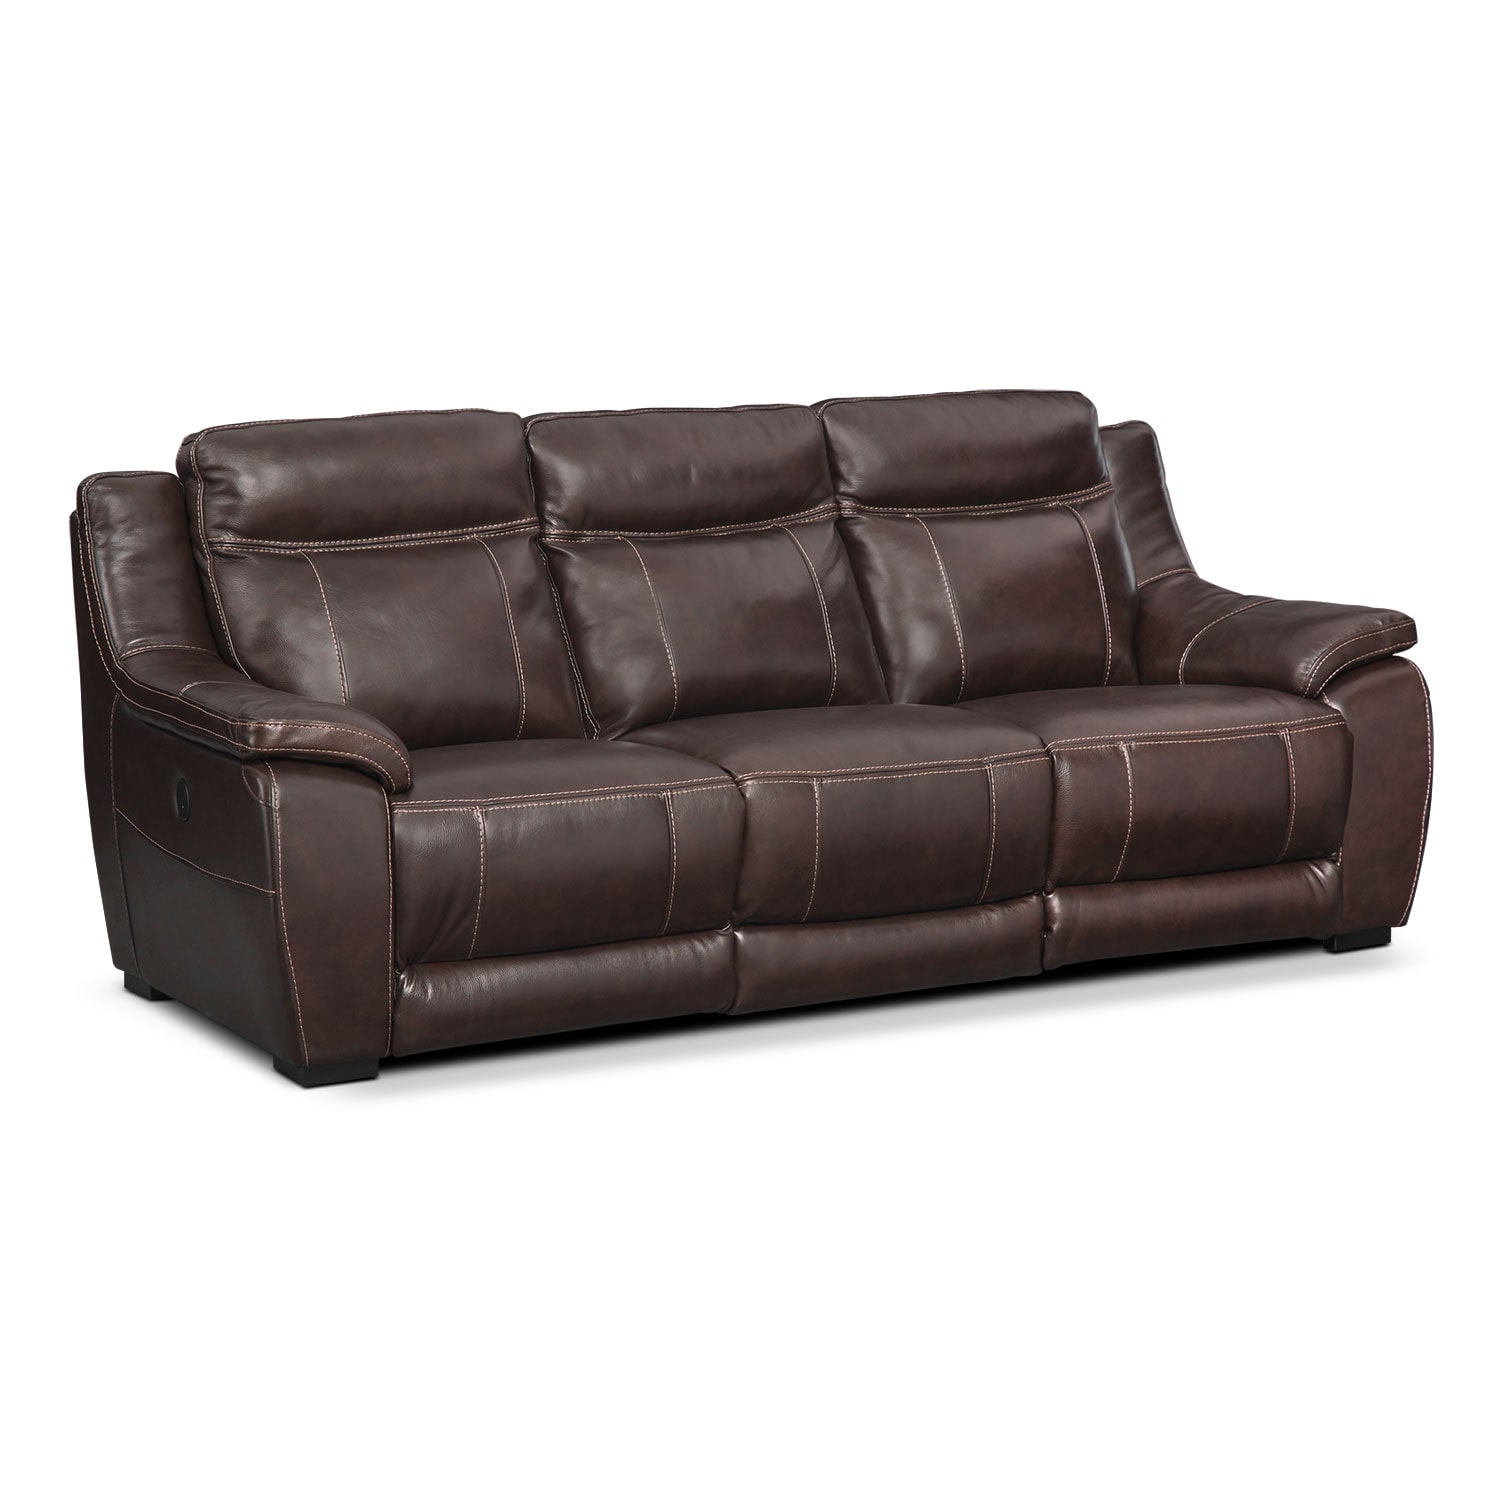 Sofas Leather Living Room Furniture